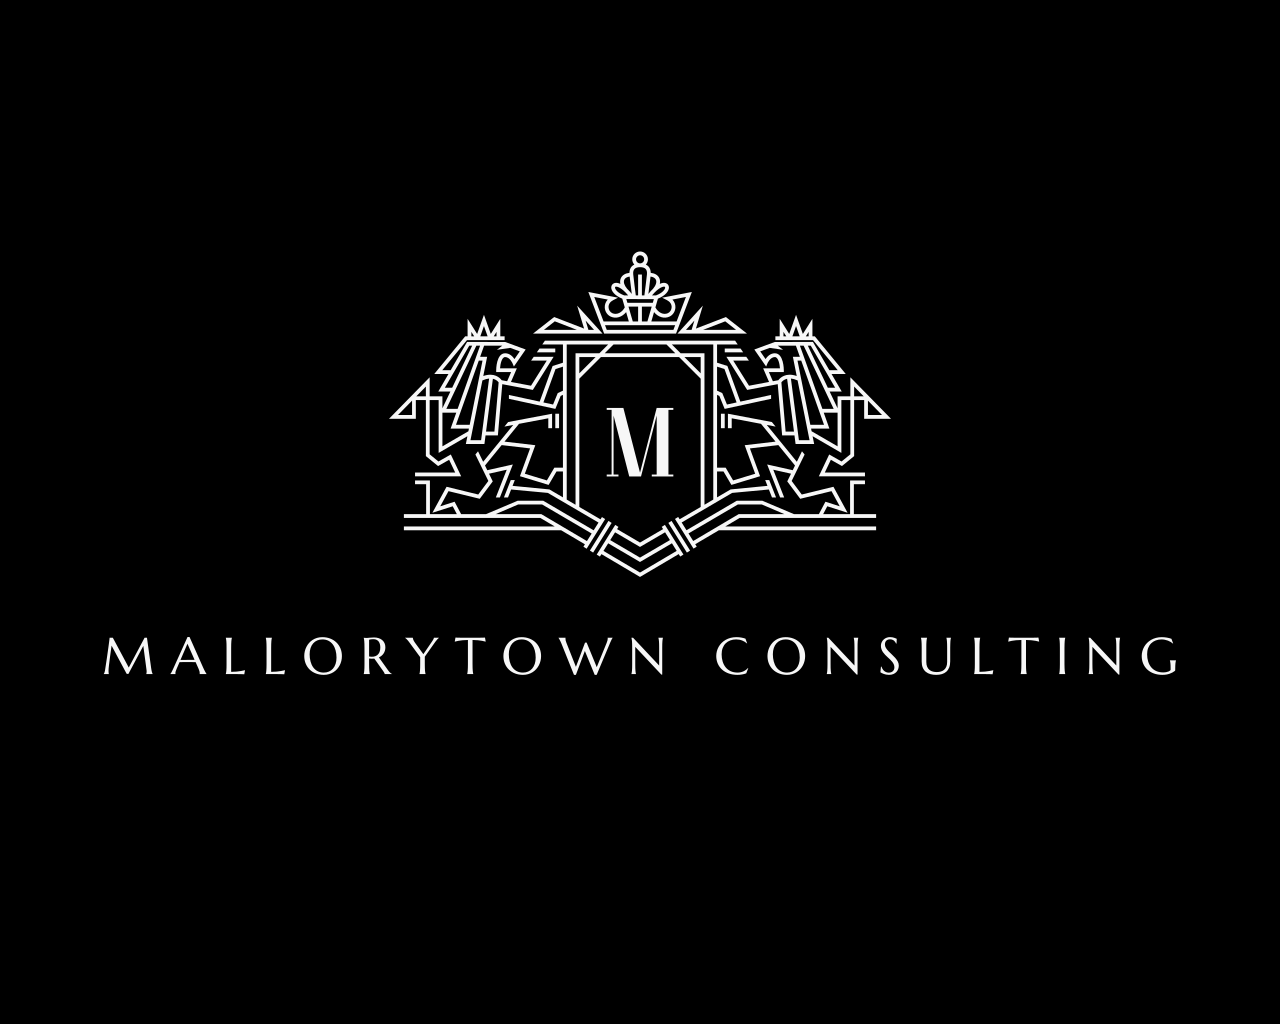 Mallorytown Consulting